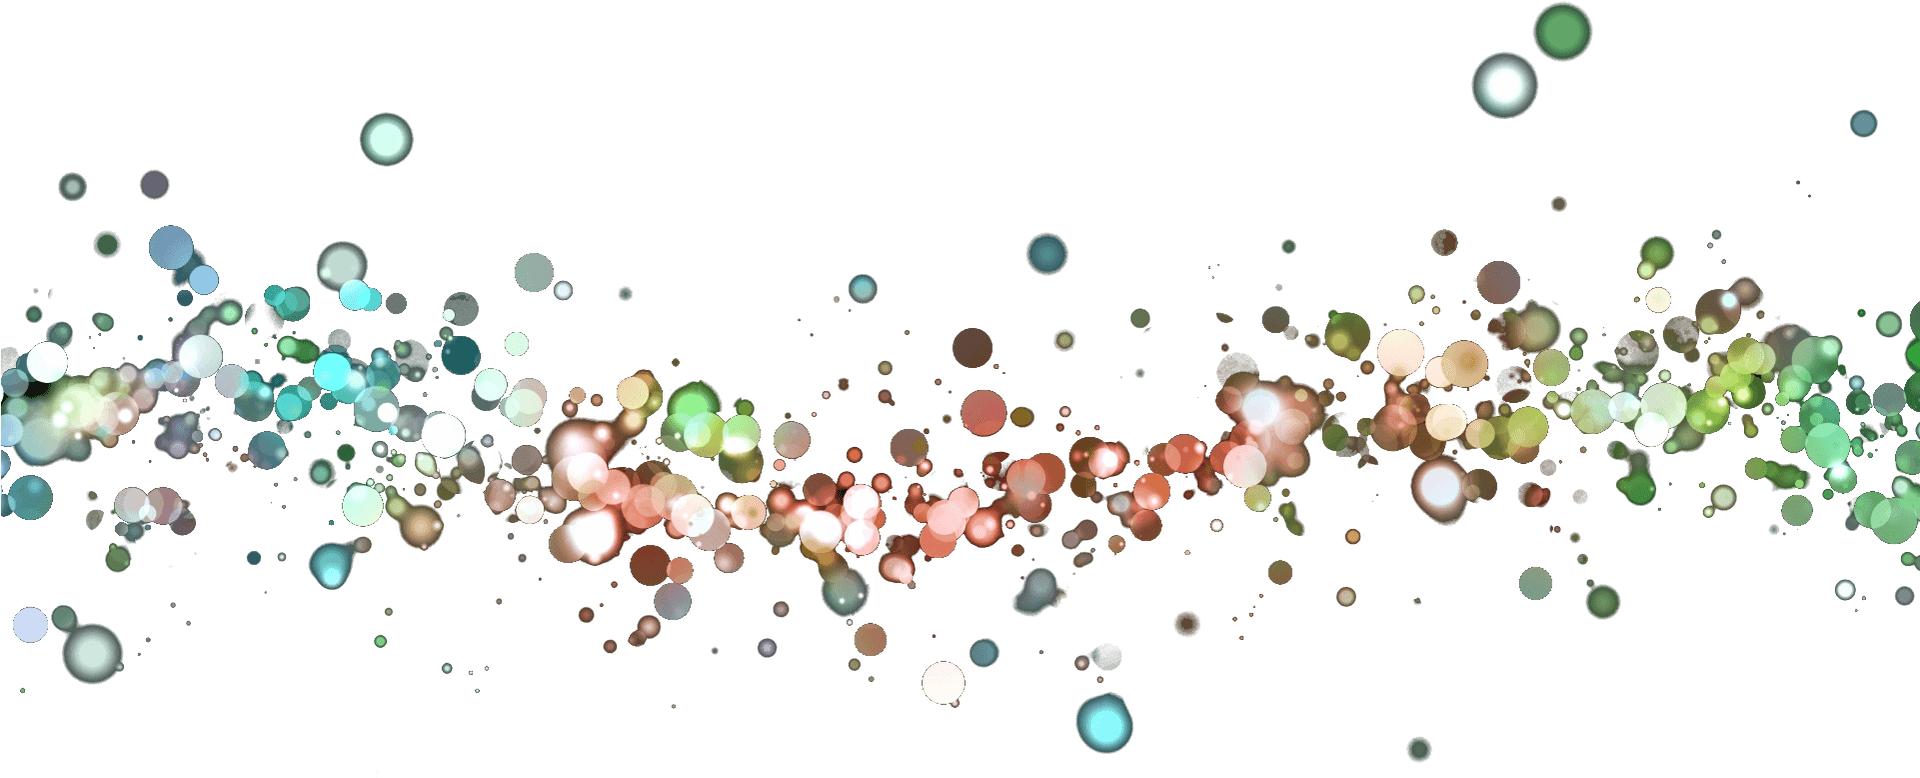 Abstract Underwater Bubble Trail.jpg PNG image